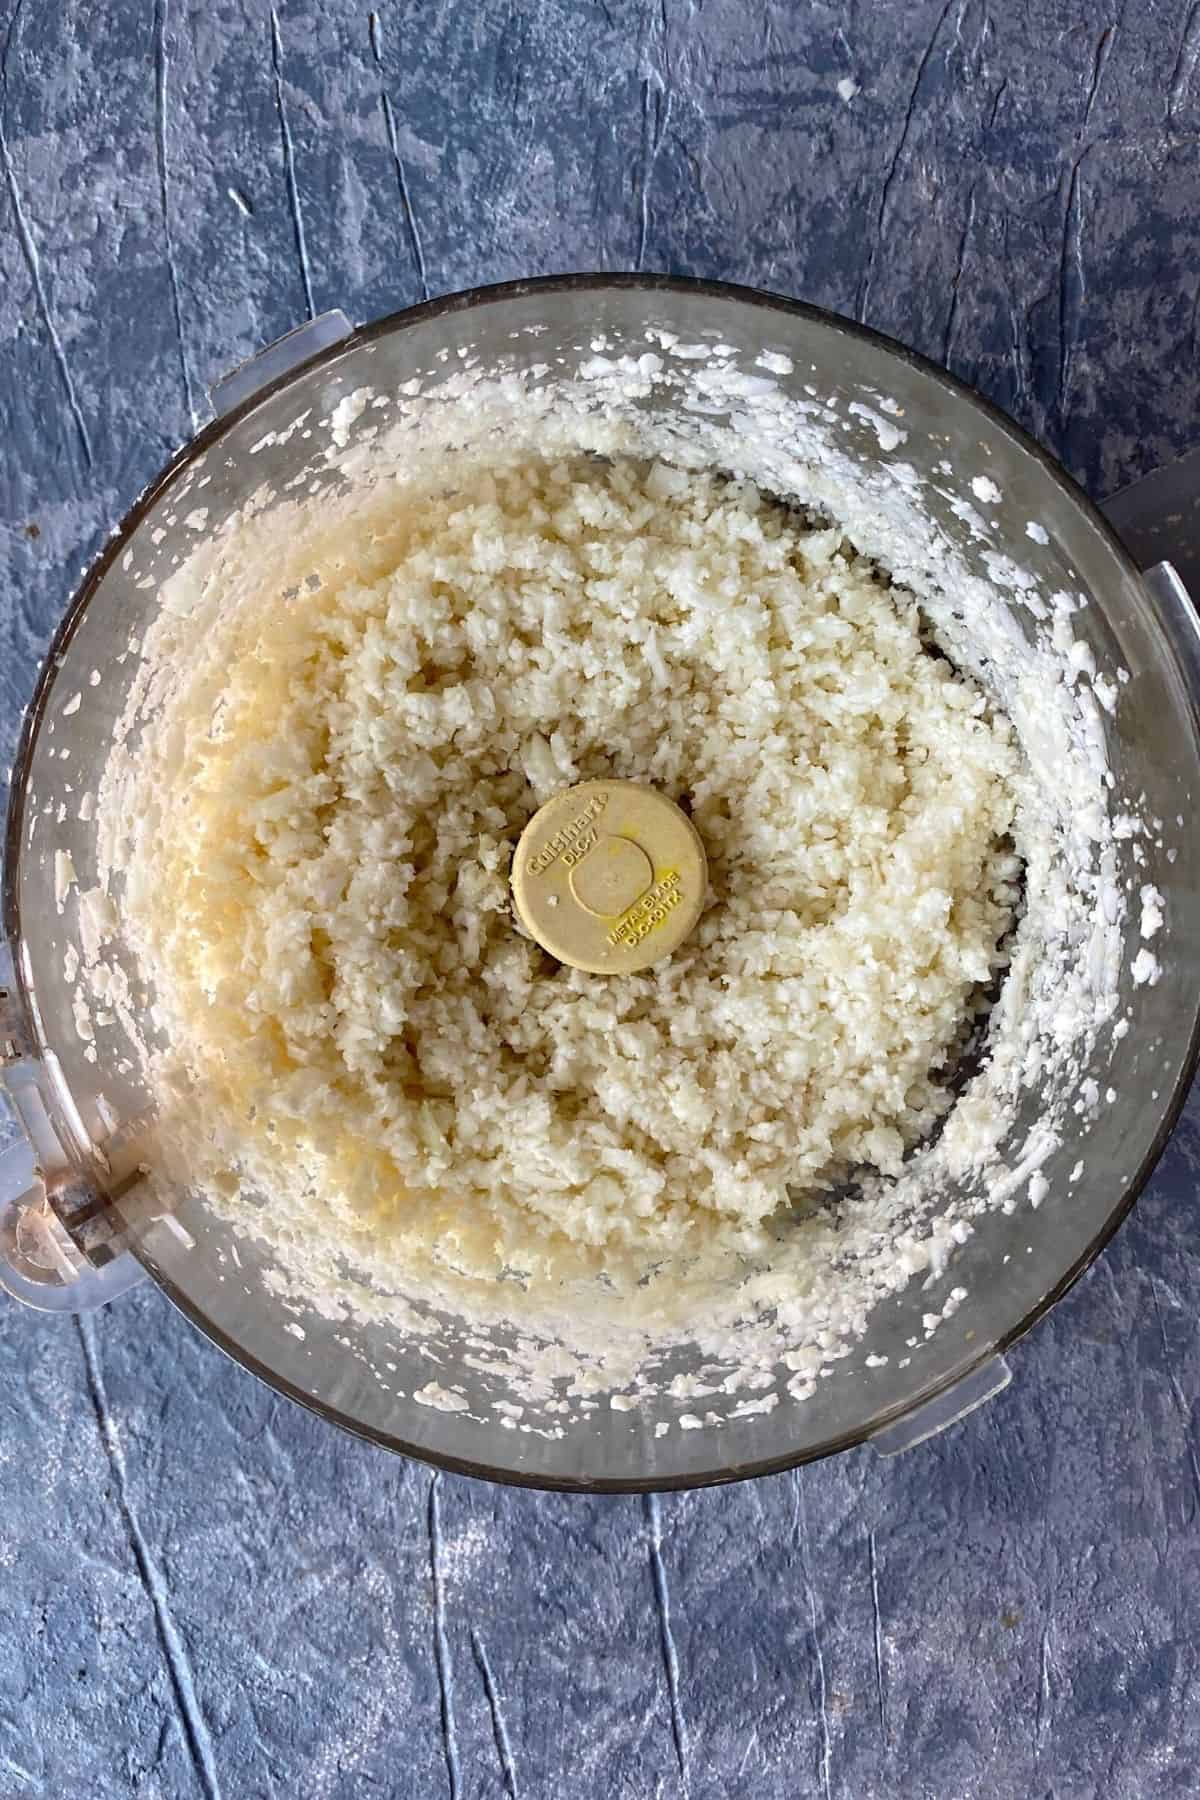 Blended up pieces of cauliflower in a food processor